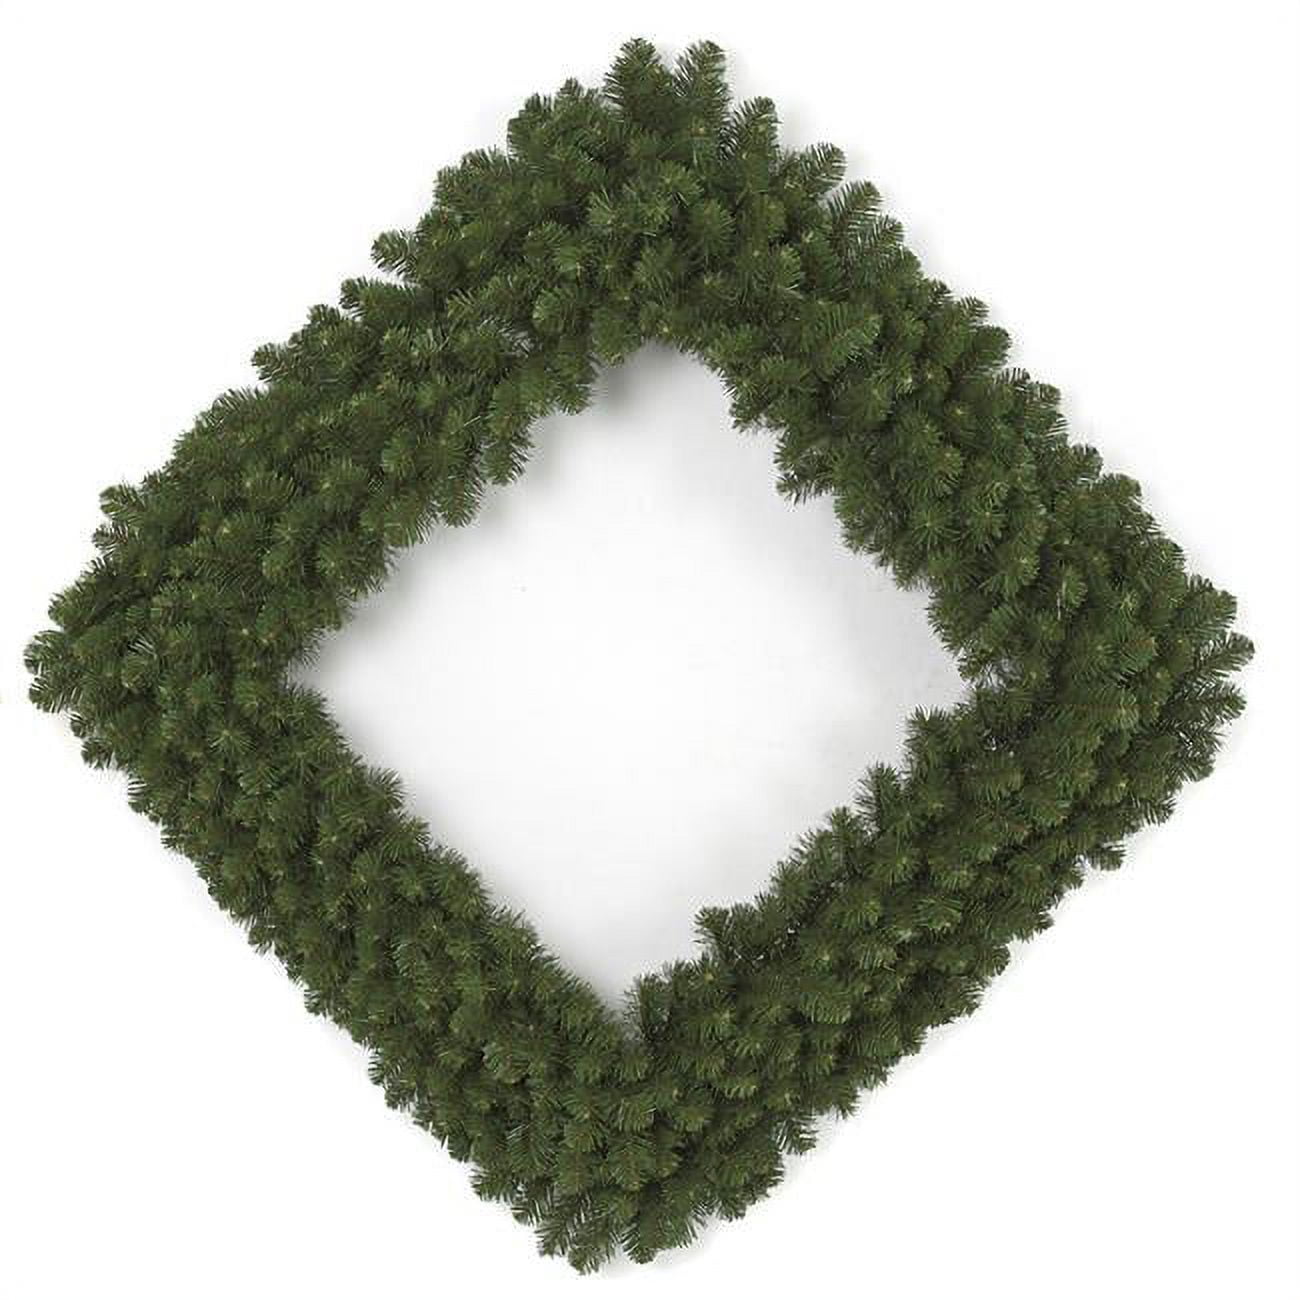 Picture of Autograph Foliages C-170890 48 in. Square Wreath, Green